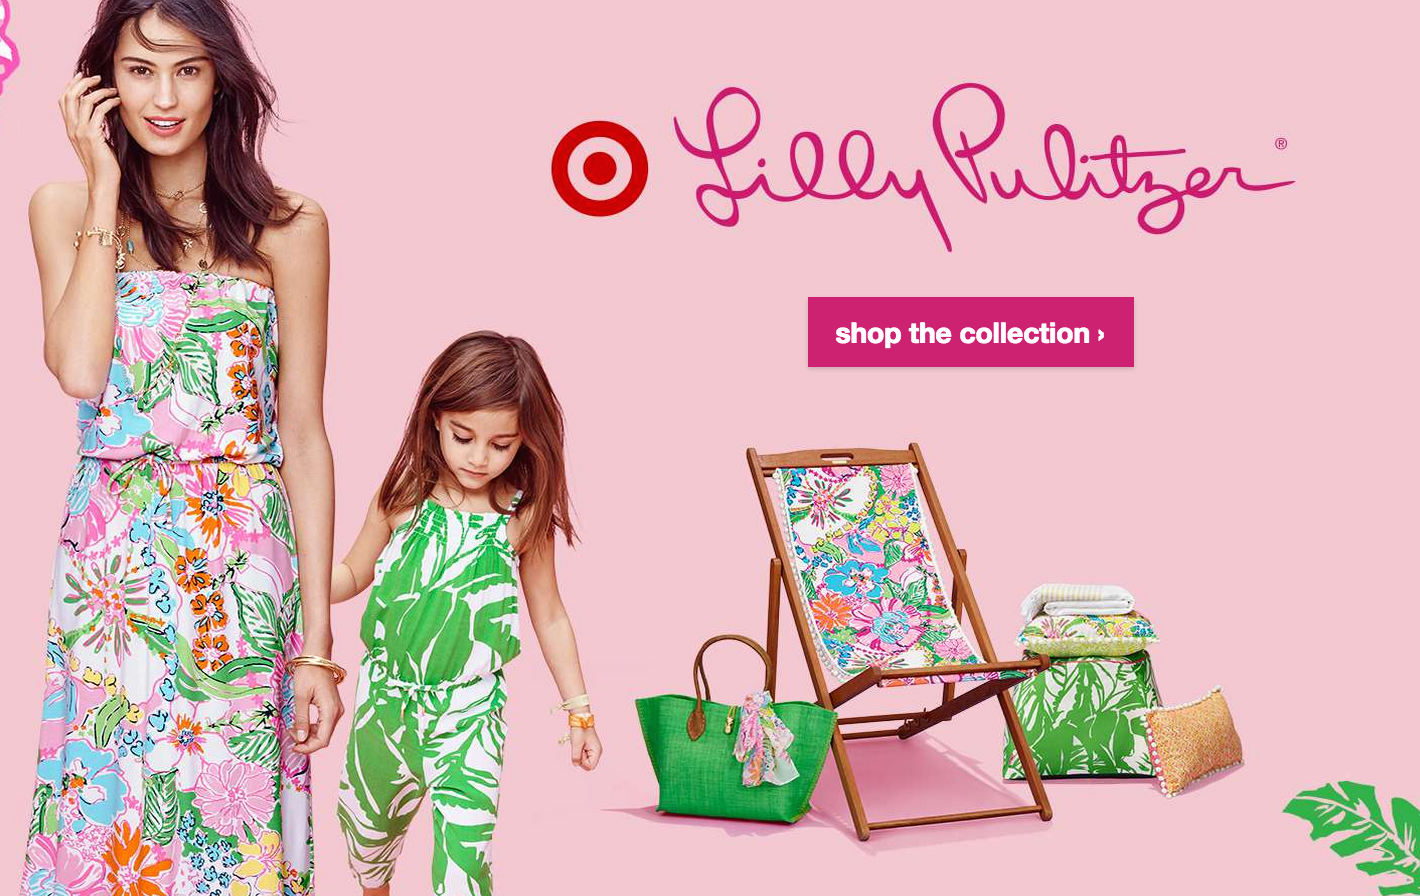 Target.com Still Can’t Handle Heavy Traffic, Crashes During Lilly Pulitzer Launch